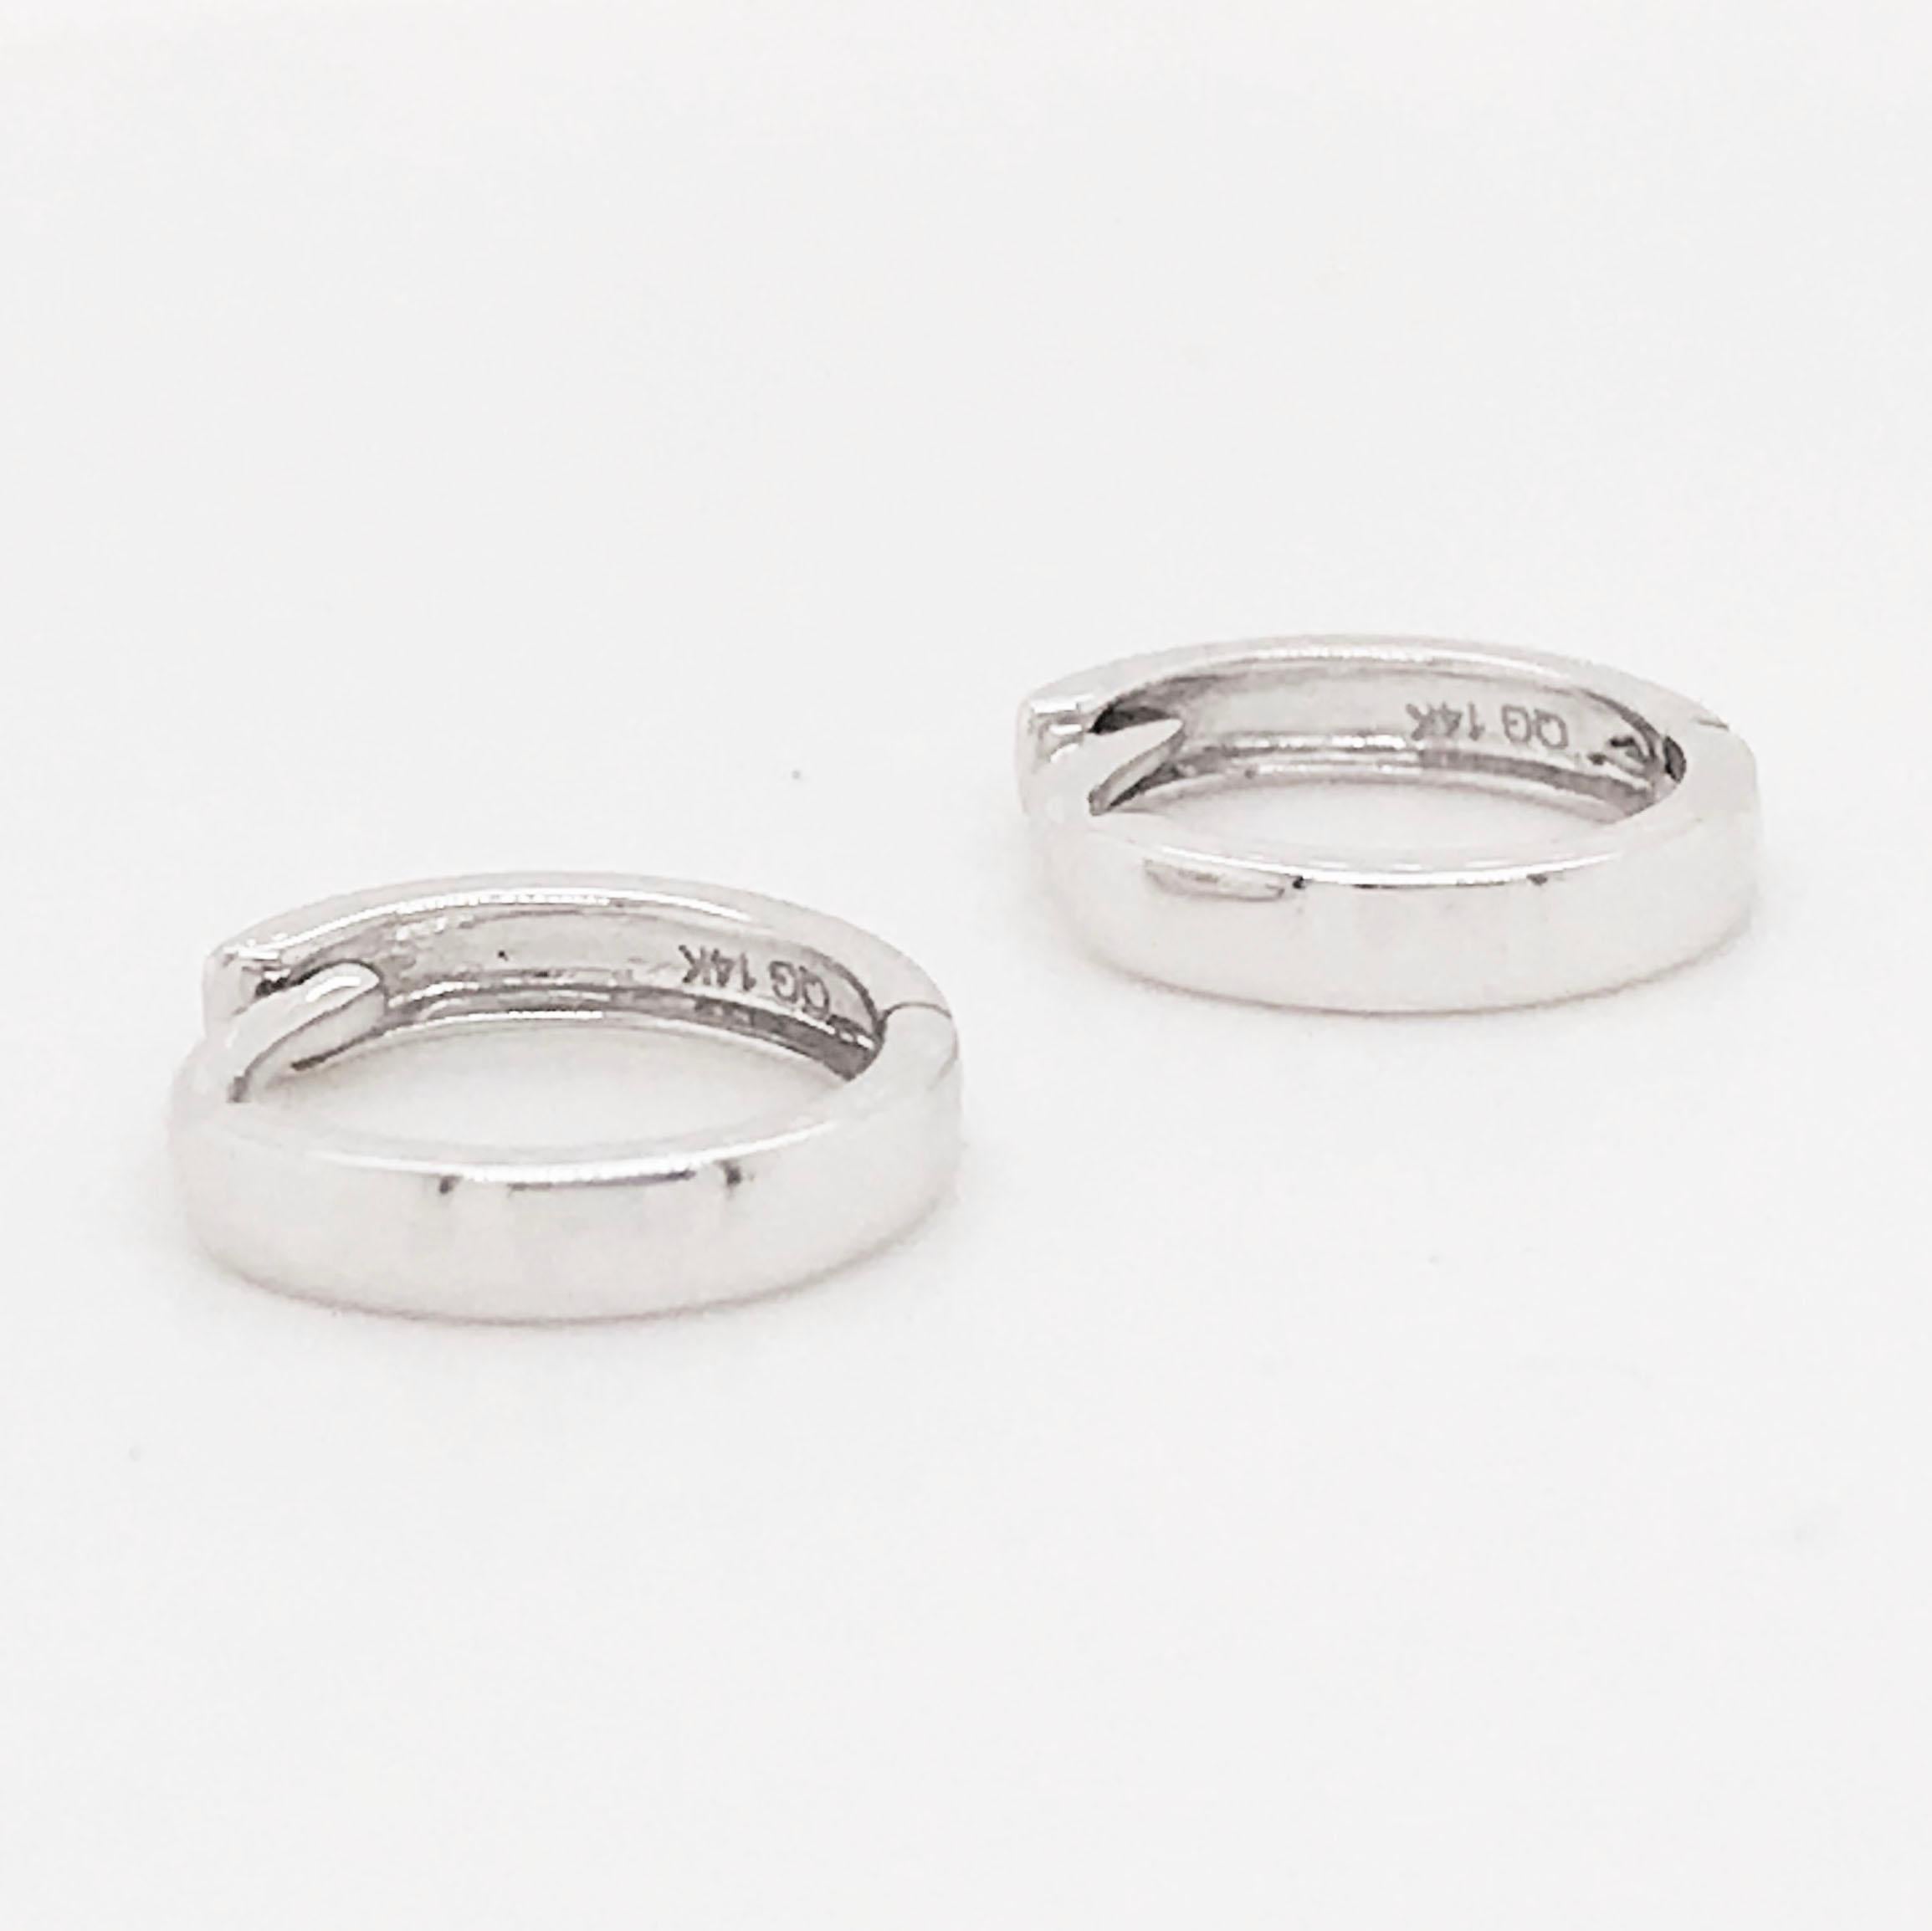 These solid white gold huggie earrings are the perfect addition to your fine jewelry collection!  They are versatile and go with everything! The solid white gold mini hoop earrings are a classic jewelry staple. Everyone should have a pair, they are